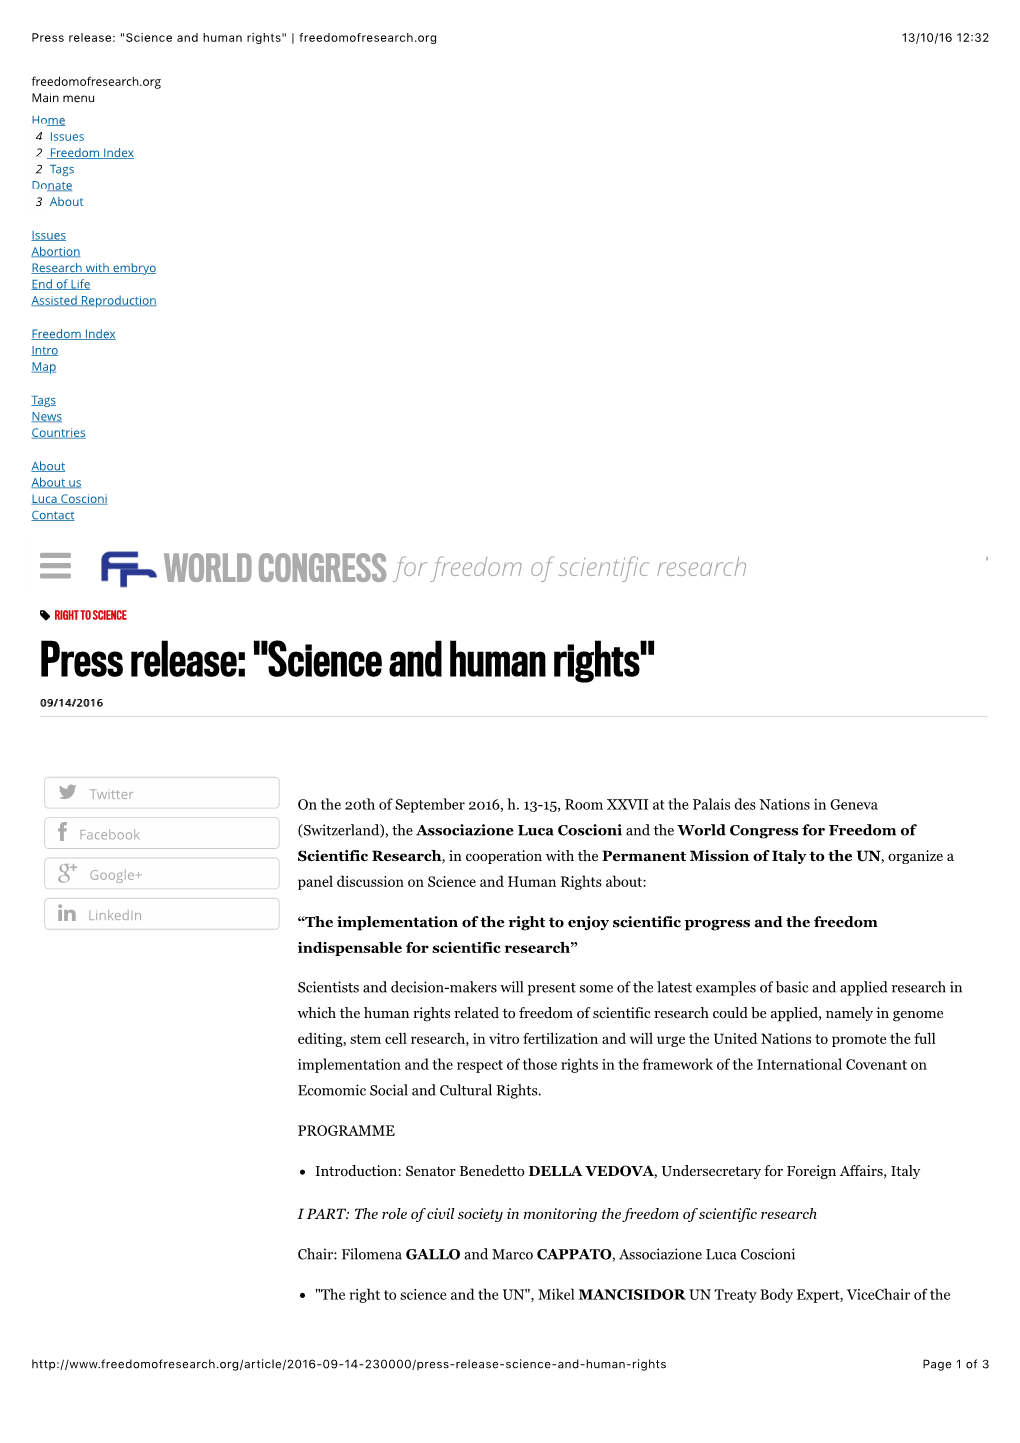 Press Release: "Science and Human Rights" | Freedomofresearch.Org 13/10/16 12:32 Freedomofresearch.Org Main Menu Home 4 Issues 2 Freedom Index 2 Tags Donate 3 About